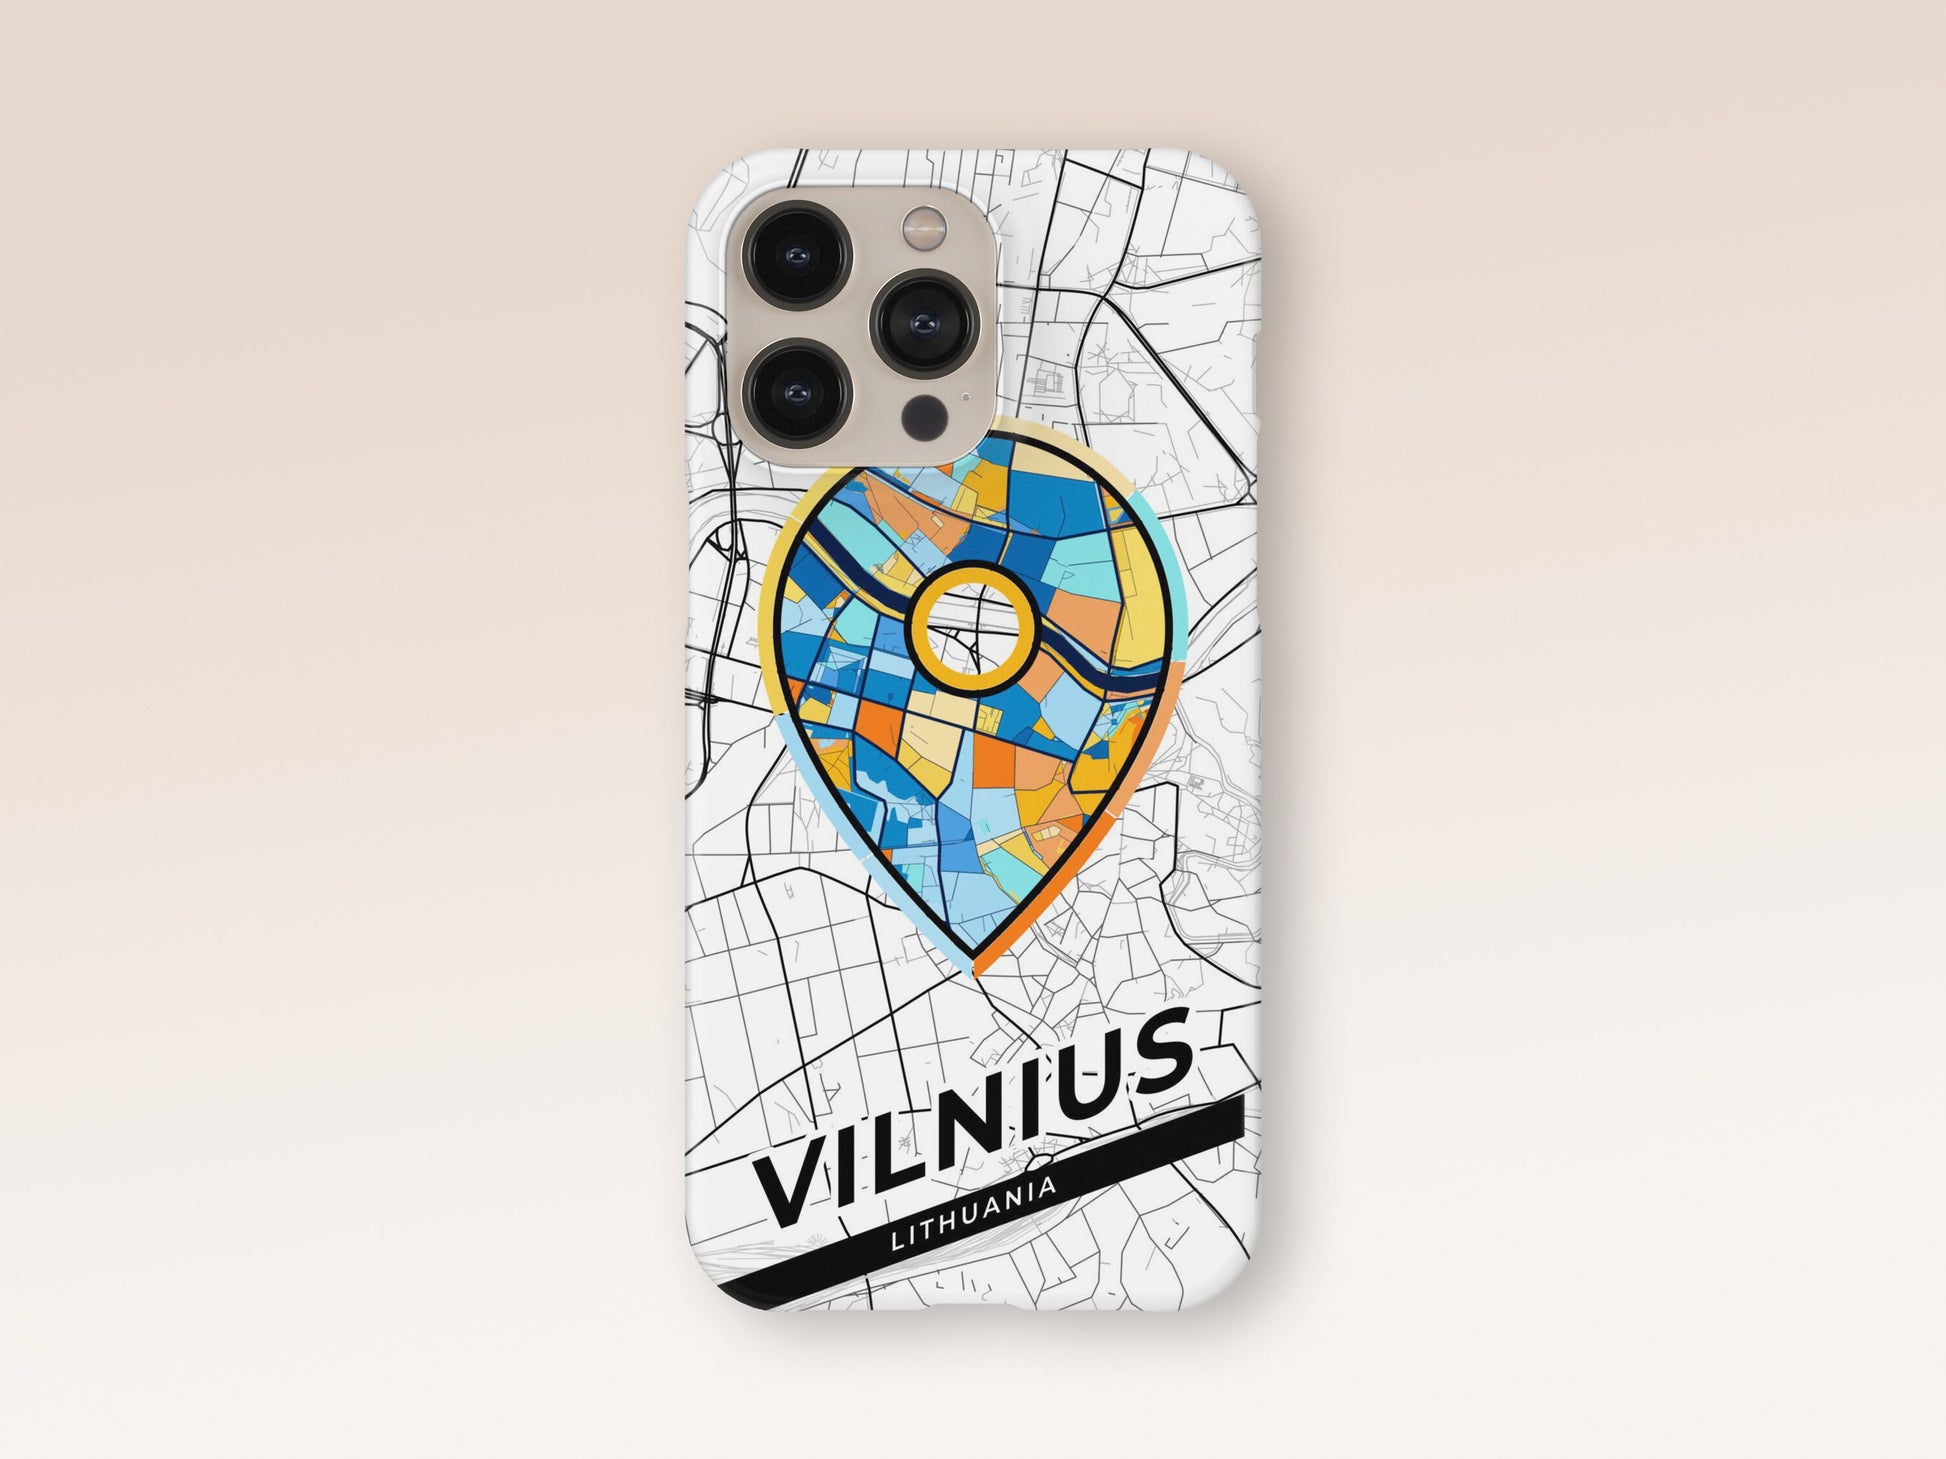 Vilnius Lithuania slim phone case with colorful icon 1